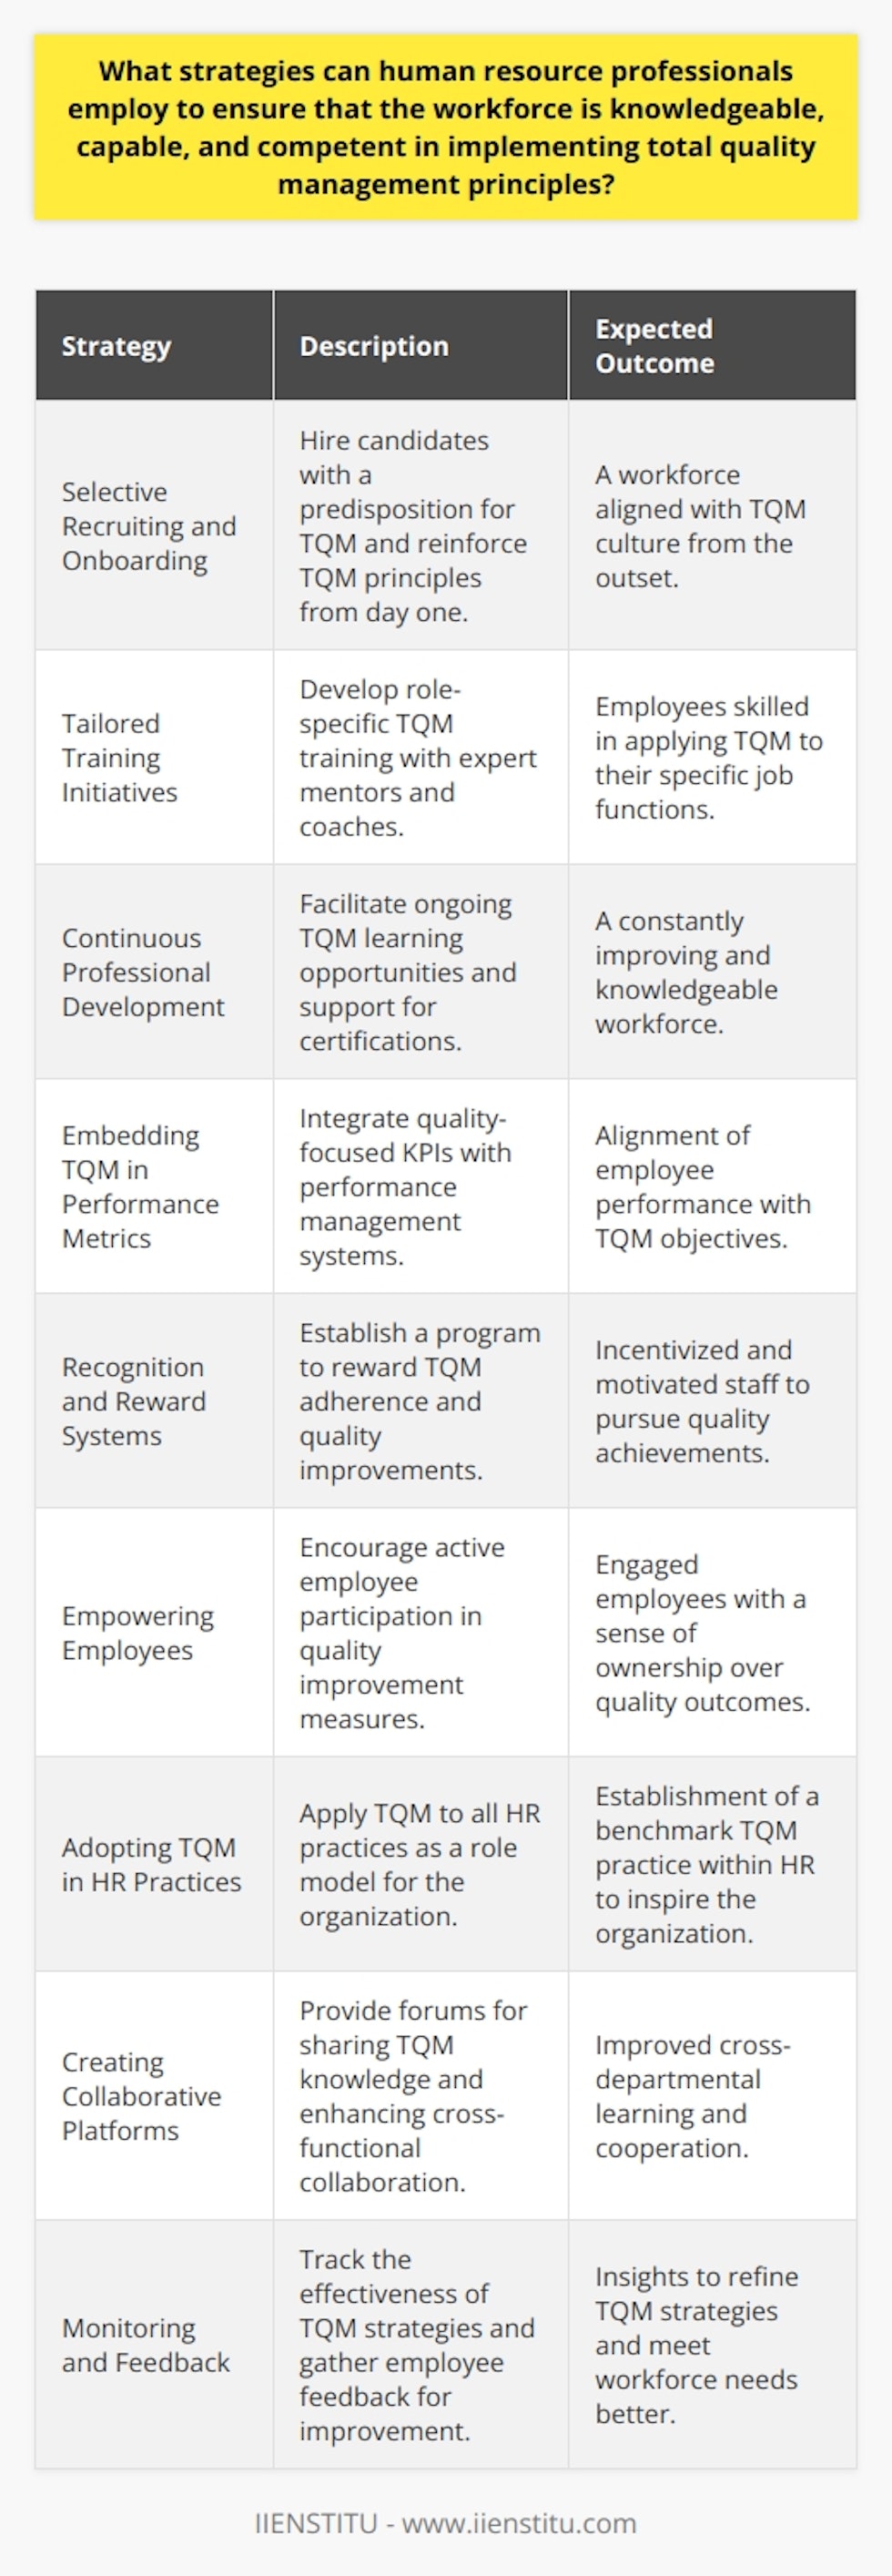 The implementation of Total Quality Management (TQM) principles is a holistic approach that requires an organization's entire workforce to be committed to quality in their processes and outcomes. Human Resource (HR) professionals are at the forefront of cultivating a culture where TQM can thrive. Here are some strategies that HR professionals can use to ensure their workforce is well-equipped to embrace TQM principles:Selective Recruiting and Onboarding:Selecting candidates who exhibit qualities such as attention to detail, a commitment to ongoing improvement, and a collaborative spirit is vital. HR can also emphasize TQM principles during the onboarding process, ensuring new hires understand the organization's commitment to quality from day one.Tailored Training Initiatives:Training initiatives should be designed to address the specific needs of various departments and roles within the organization. This may involve developing specialized TQM training modules and employing seasoned TQM practitioners to share their knowledge through mentoring or coaching sessions.Continuous Professional Development (CPD):Creating CPD programs can keep the workforce up-to-date with the latest TQM methodologies. This may include facilitating access to TQM certifications, supporting attendance at industry conferences, and providing in-house learning sessions led by TQM experts.Embedding TQM in Performance Metrics:Performance management systems should include metrics that reflect TQM objectives. HR can work with departmental leaders to integrate quality-focused key performance indicators (KPIs) that align with overall business goals.Recognition and Reward Systems:Acknowledging and rewarding teams and individuals who consistently apply TQM principles and contribute to quality enhancements can serve as motivation for the entire organization. Establishing a recognition program that specifically highlights excellence in quality initiatives reinforces the importance of TQM.Empowering Employees:HR can promote empowerment by facilitating problem-solving teams, quality circles, and suggestion schemes that allow employees to actively contribute to quality improvement measures. Empowered employees are more engaged and take greater ownership of their work and its outcomes.Adopting TQM in HR Practices:HR itself should be a role model in applying TQM to its processes, from recruitment to training and employee relations. A continuous improvement approach within HR sets a precedent for the entire organization.Creating Collaborative Platforms:Establishing forums and platforms where knowledge about TQM practices can be shared across the organization enhances learning and cross-functional collaboration. These platforms can take the form of intranet sites, regular meetings, or collaborative tools.Monitoring and Feedback:Implementing a system that captures feedback on TQM practices and their impact can help HR professionals to fine-tune strategies and address areas that need improvement. Regular surveys, focus groups, and feedback channels can provide valuable insights.By focusing on these strategies, HR professionals can build a strong and resilient workforce that embodies the principles of TQM. This will not only lead to improvements in the quality of products and services but also help in fostering an organizational culture where excellence is the norm.